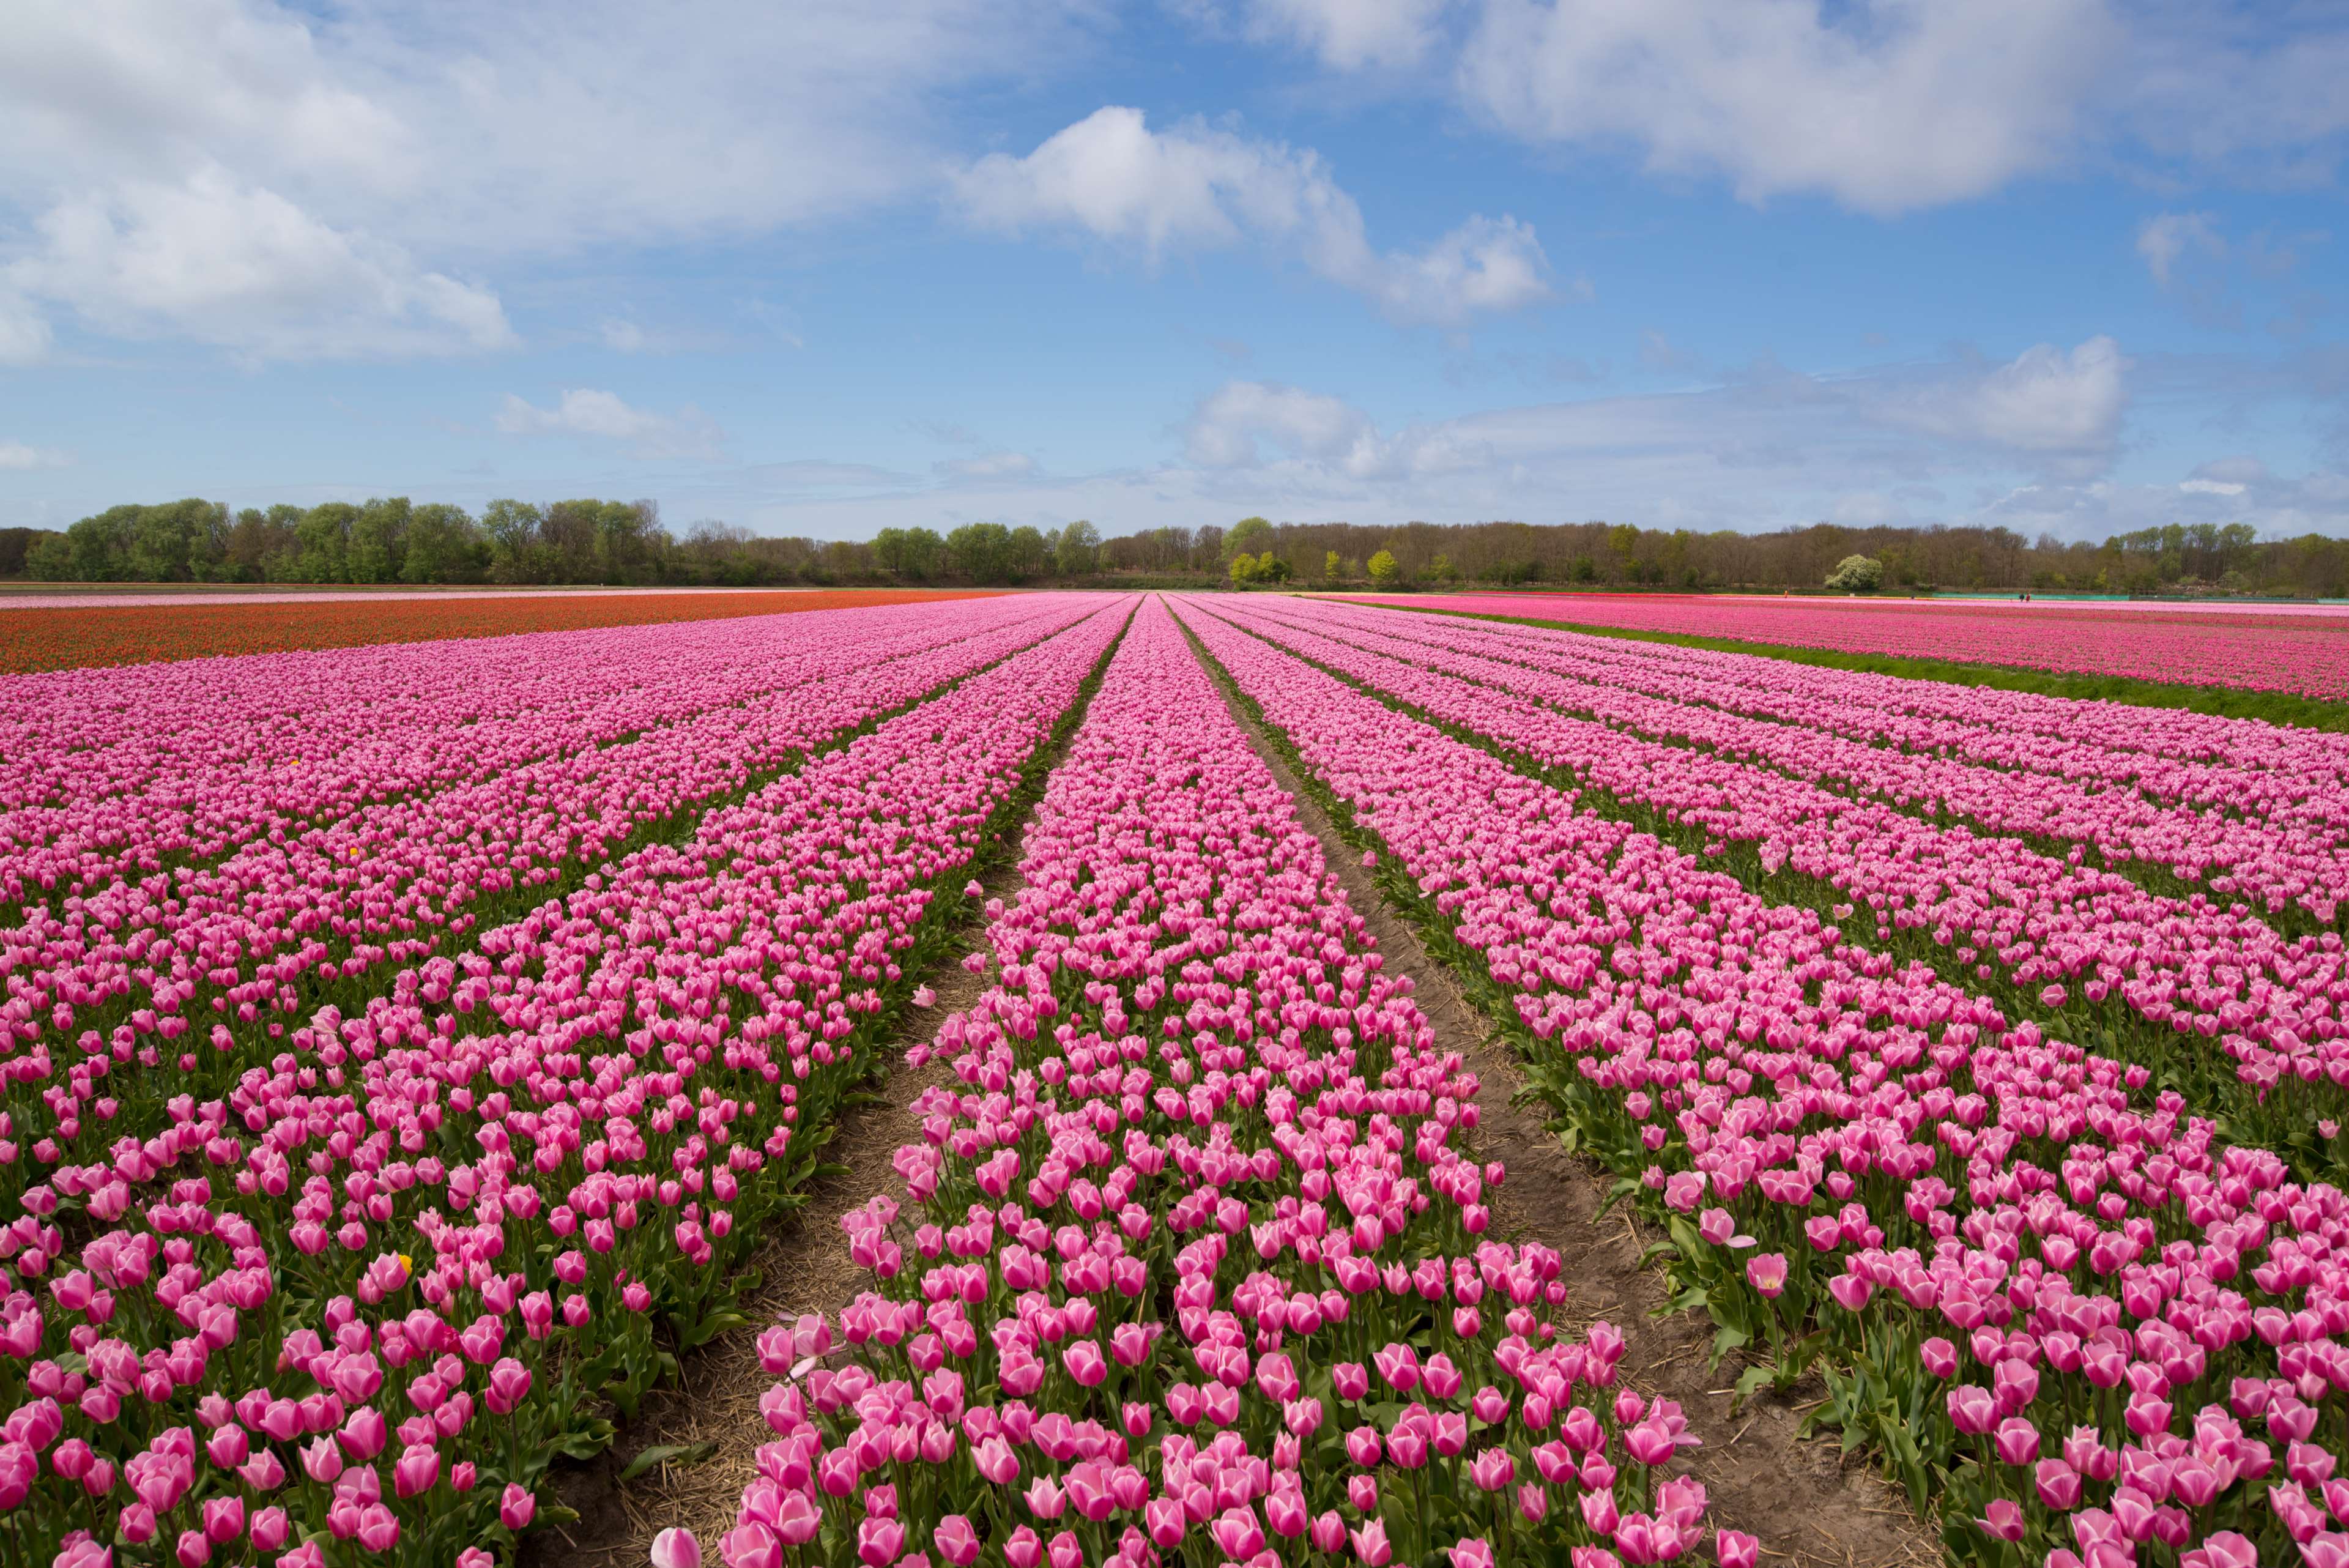 Agriculture Blooming Blossom Cc0 Dutch Culture Field